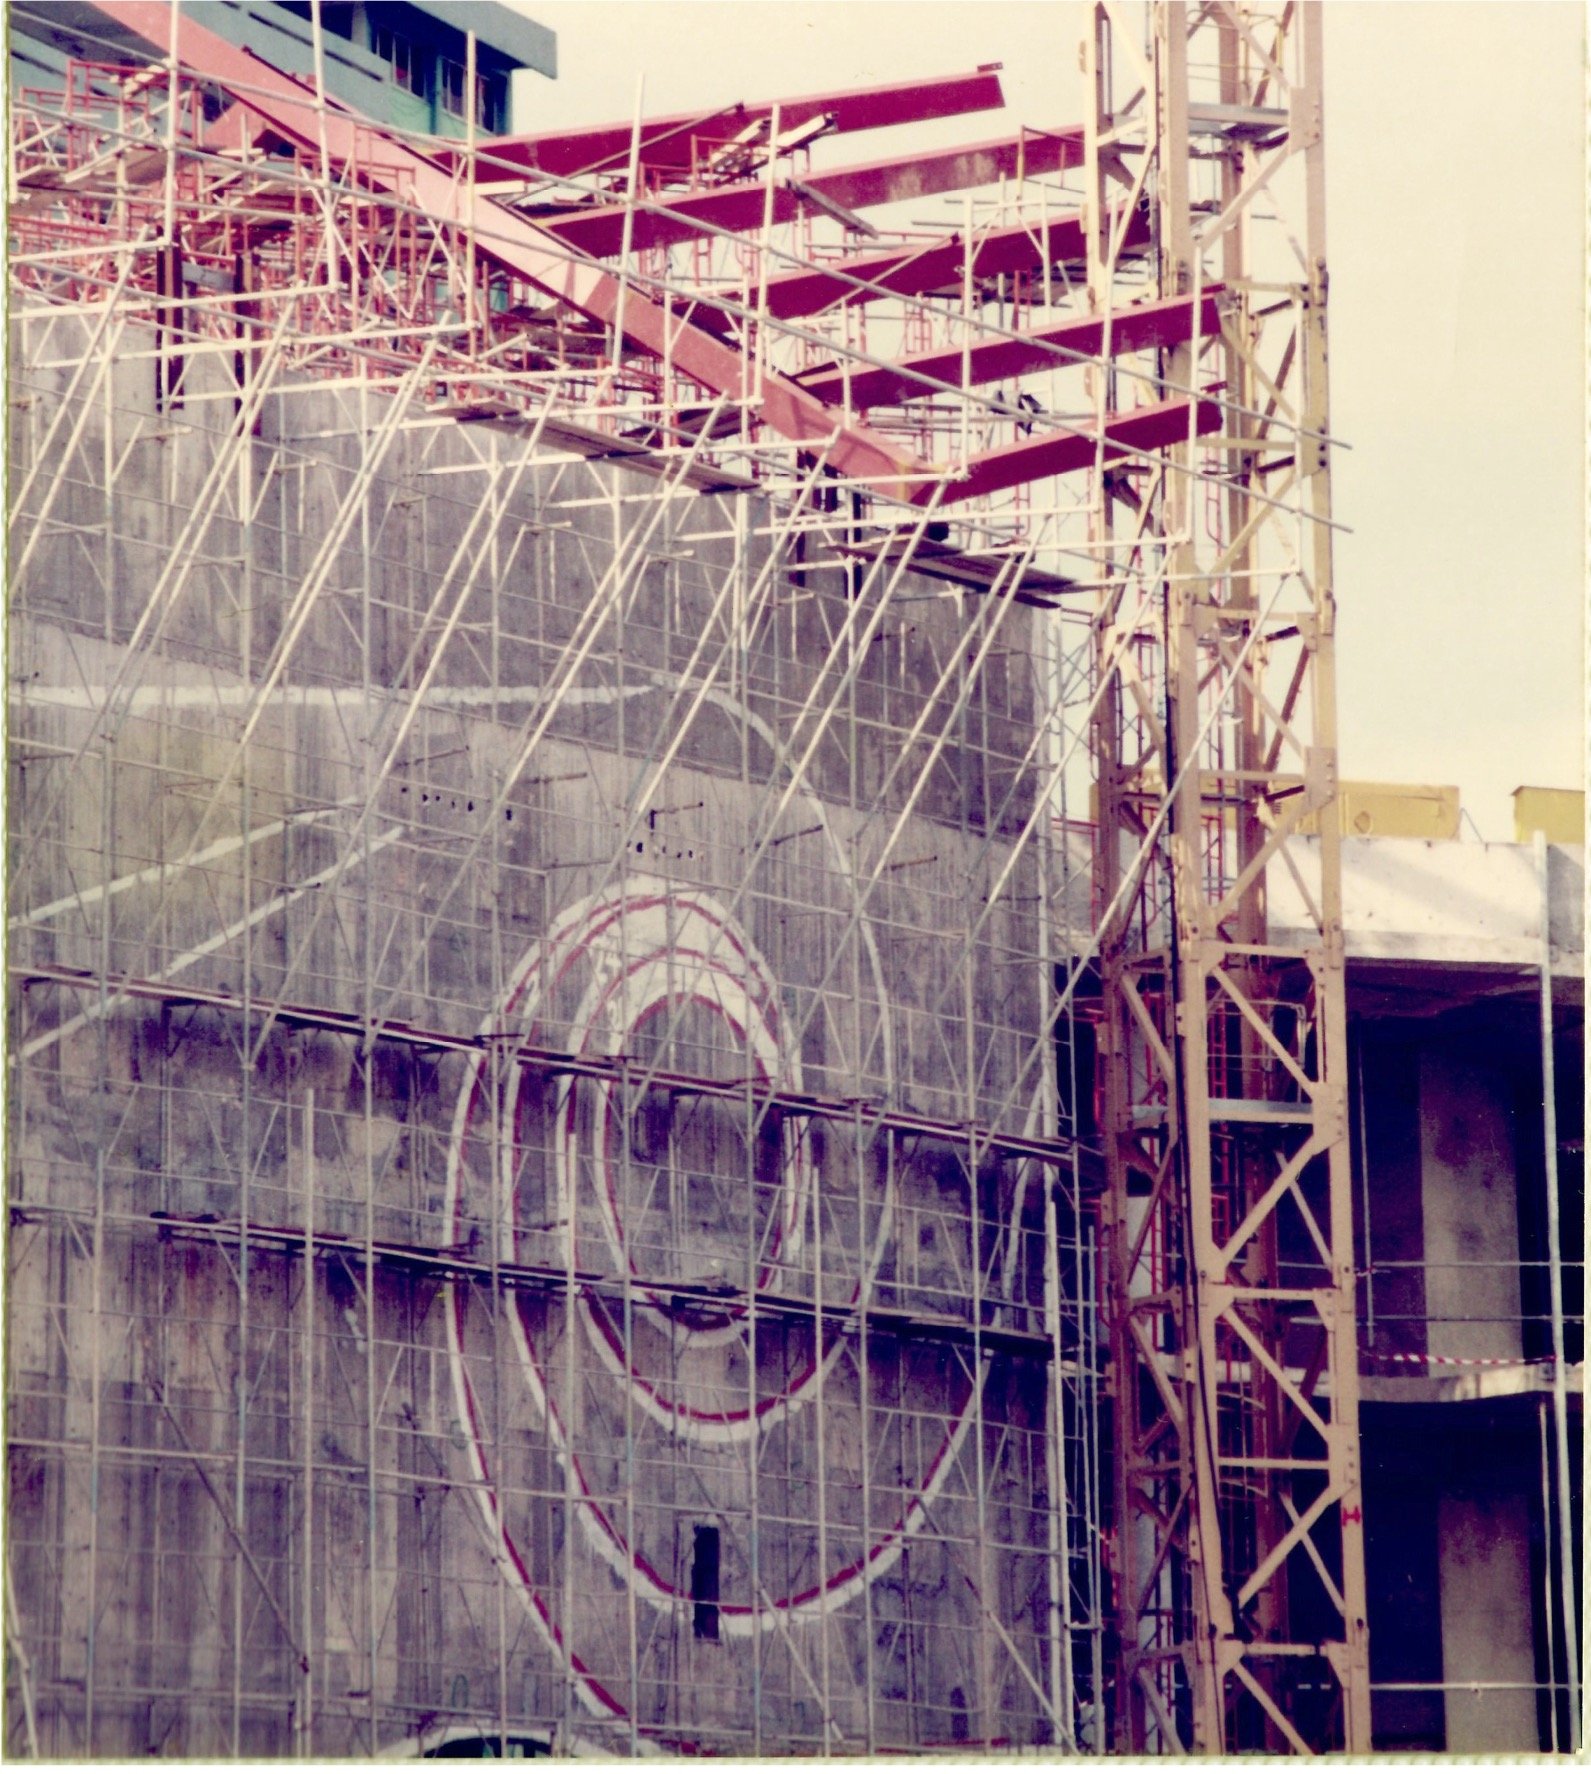 The mural under construction. Private collection.